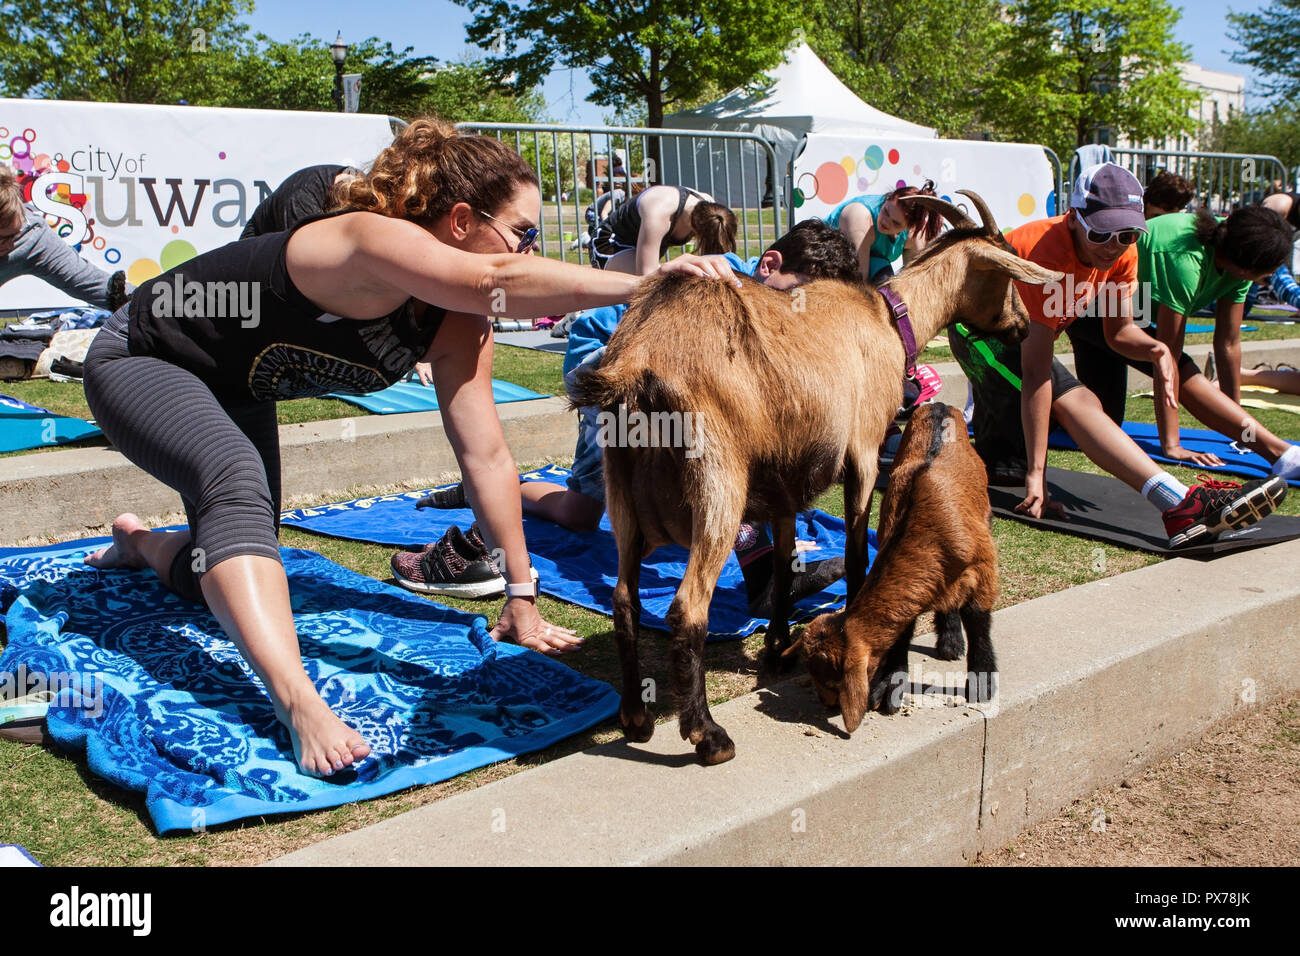 Suwanee, GA, USA - April 29, 2018:  A woman pets a goat while stretching at a goat yoga class in a public park on April 29, 2018 in Suwanee, GA. Stock Photo